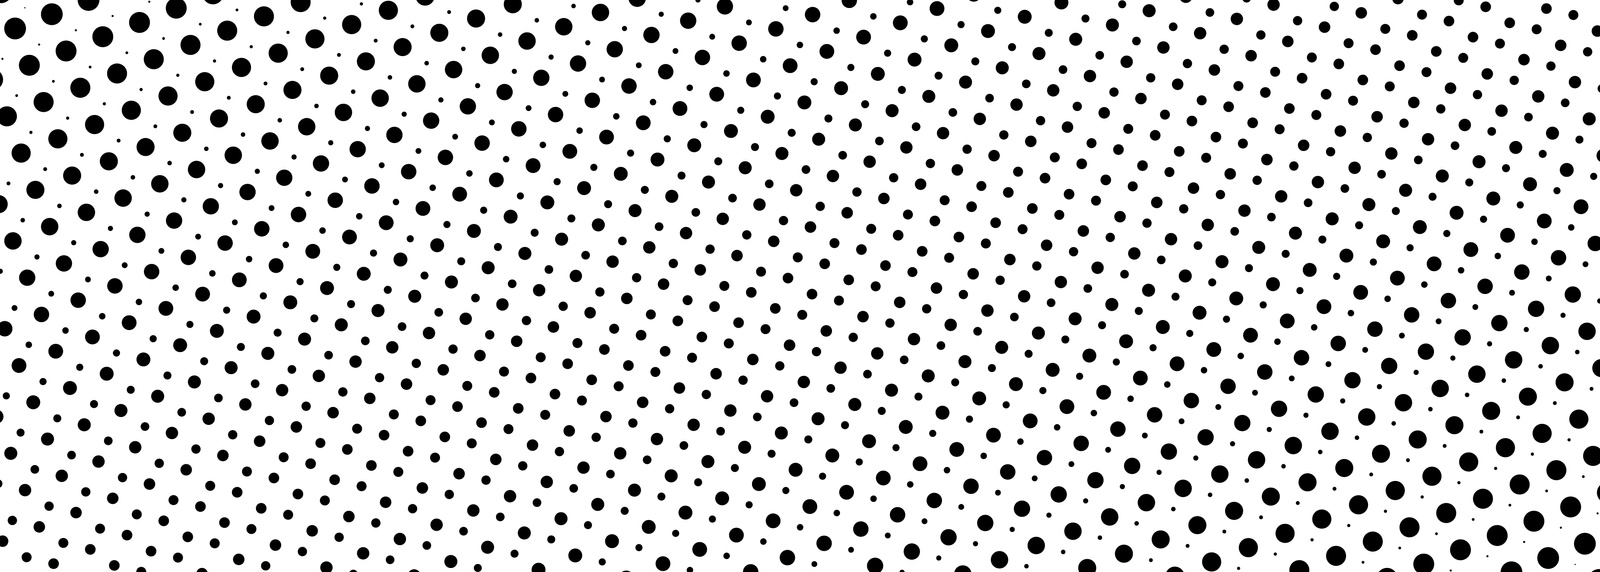 Black halftone dot texture overlay on white wide background.